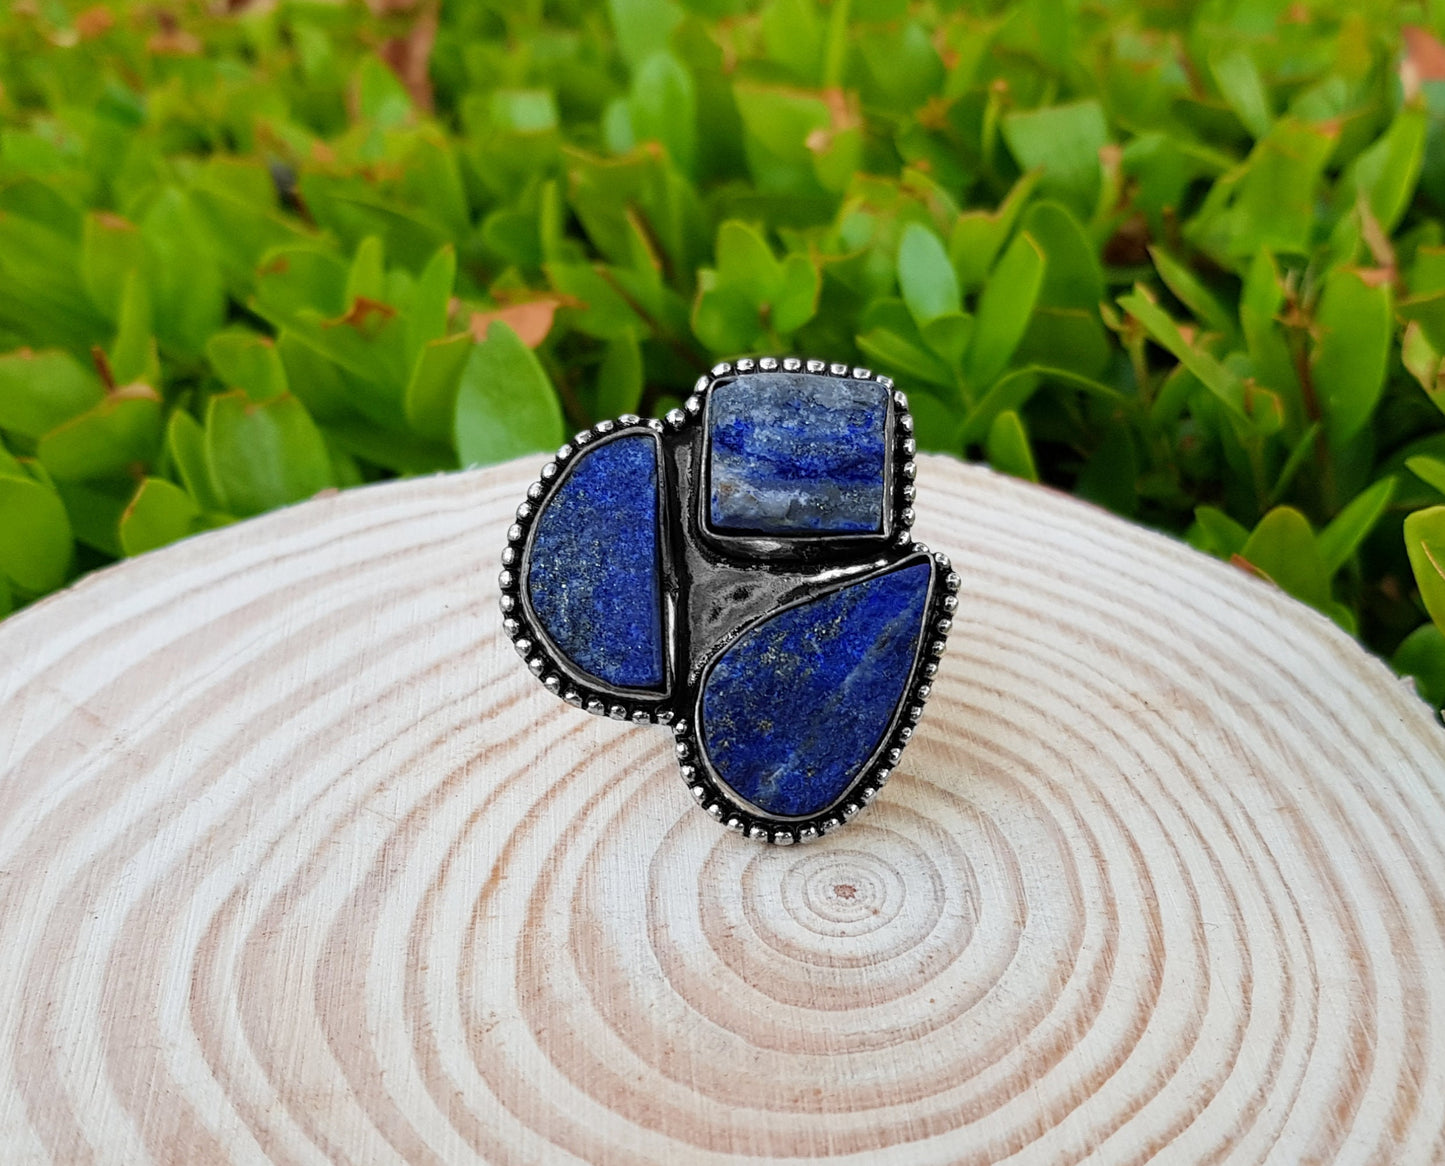 Raw Lapis Lazuli Multi Stone Ring In Sterling Silver Size US 6 Big Statement Ring Boho Crystal Rings GypsyJewelry Unique Gift For Women